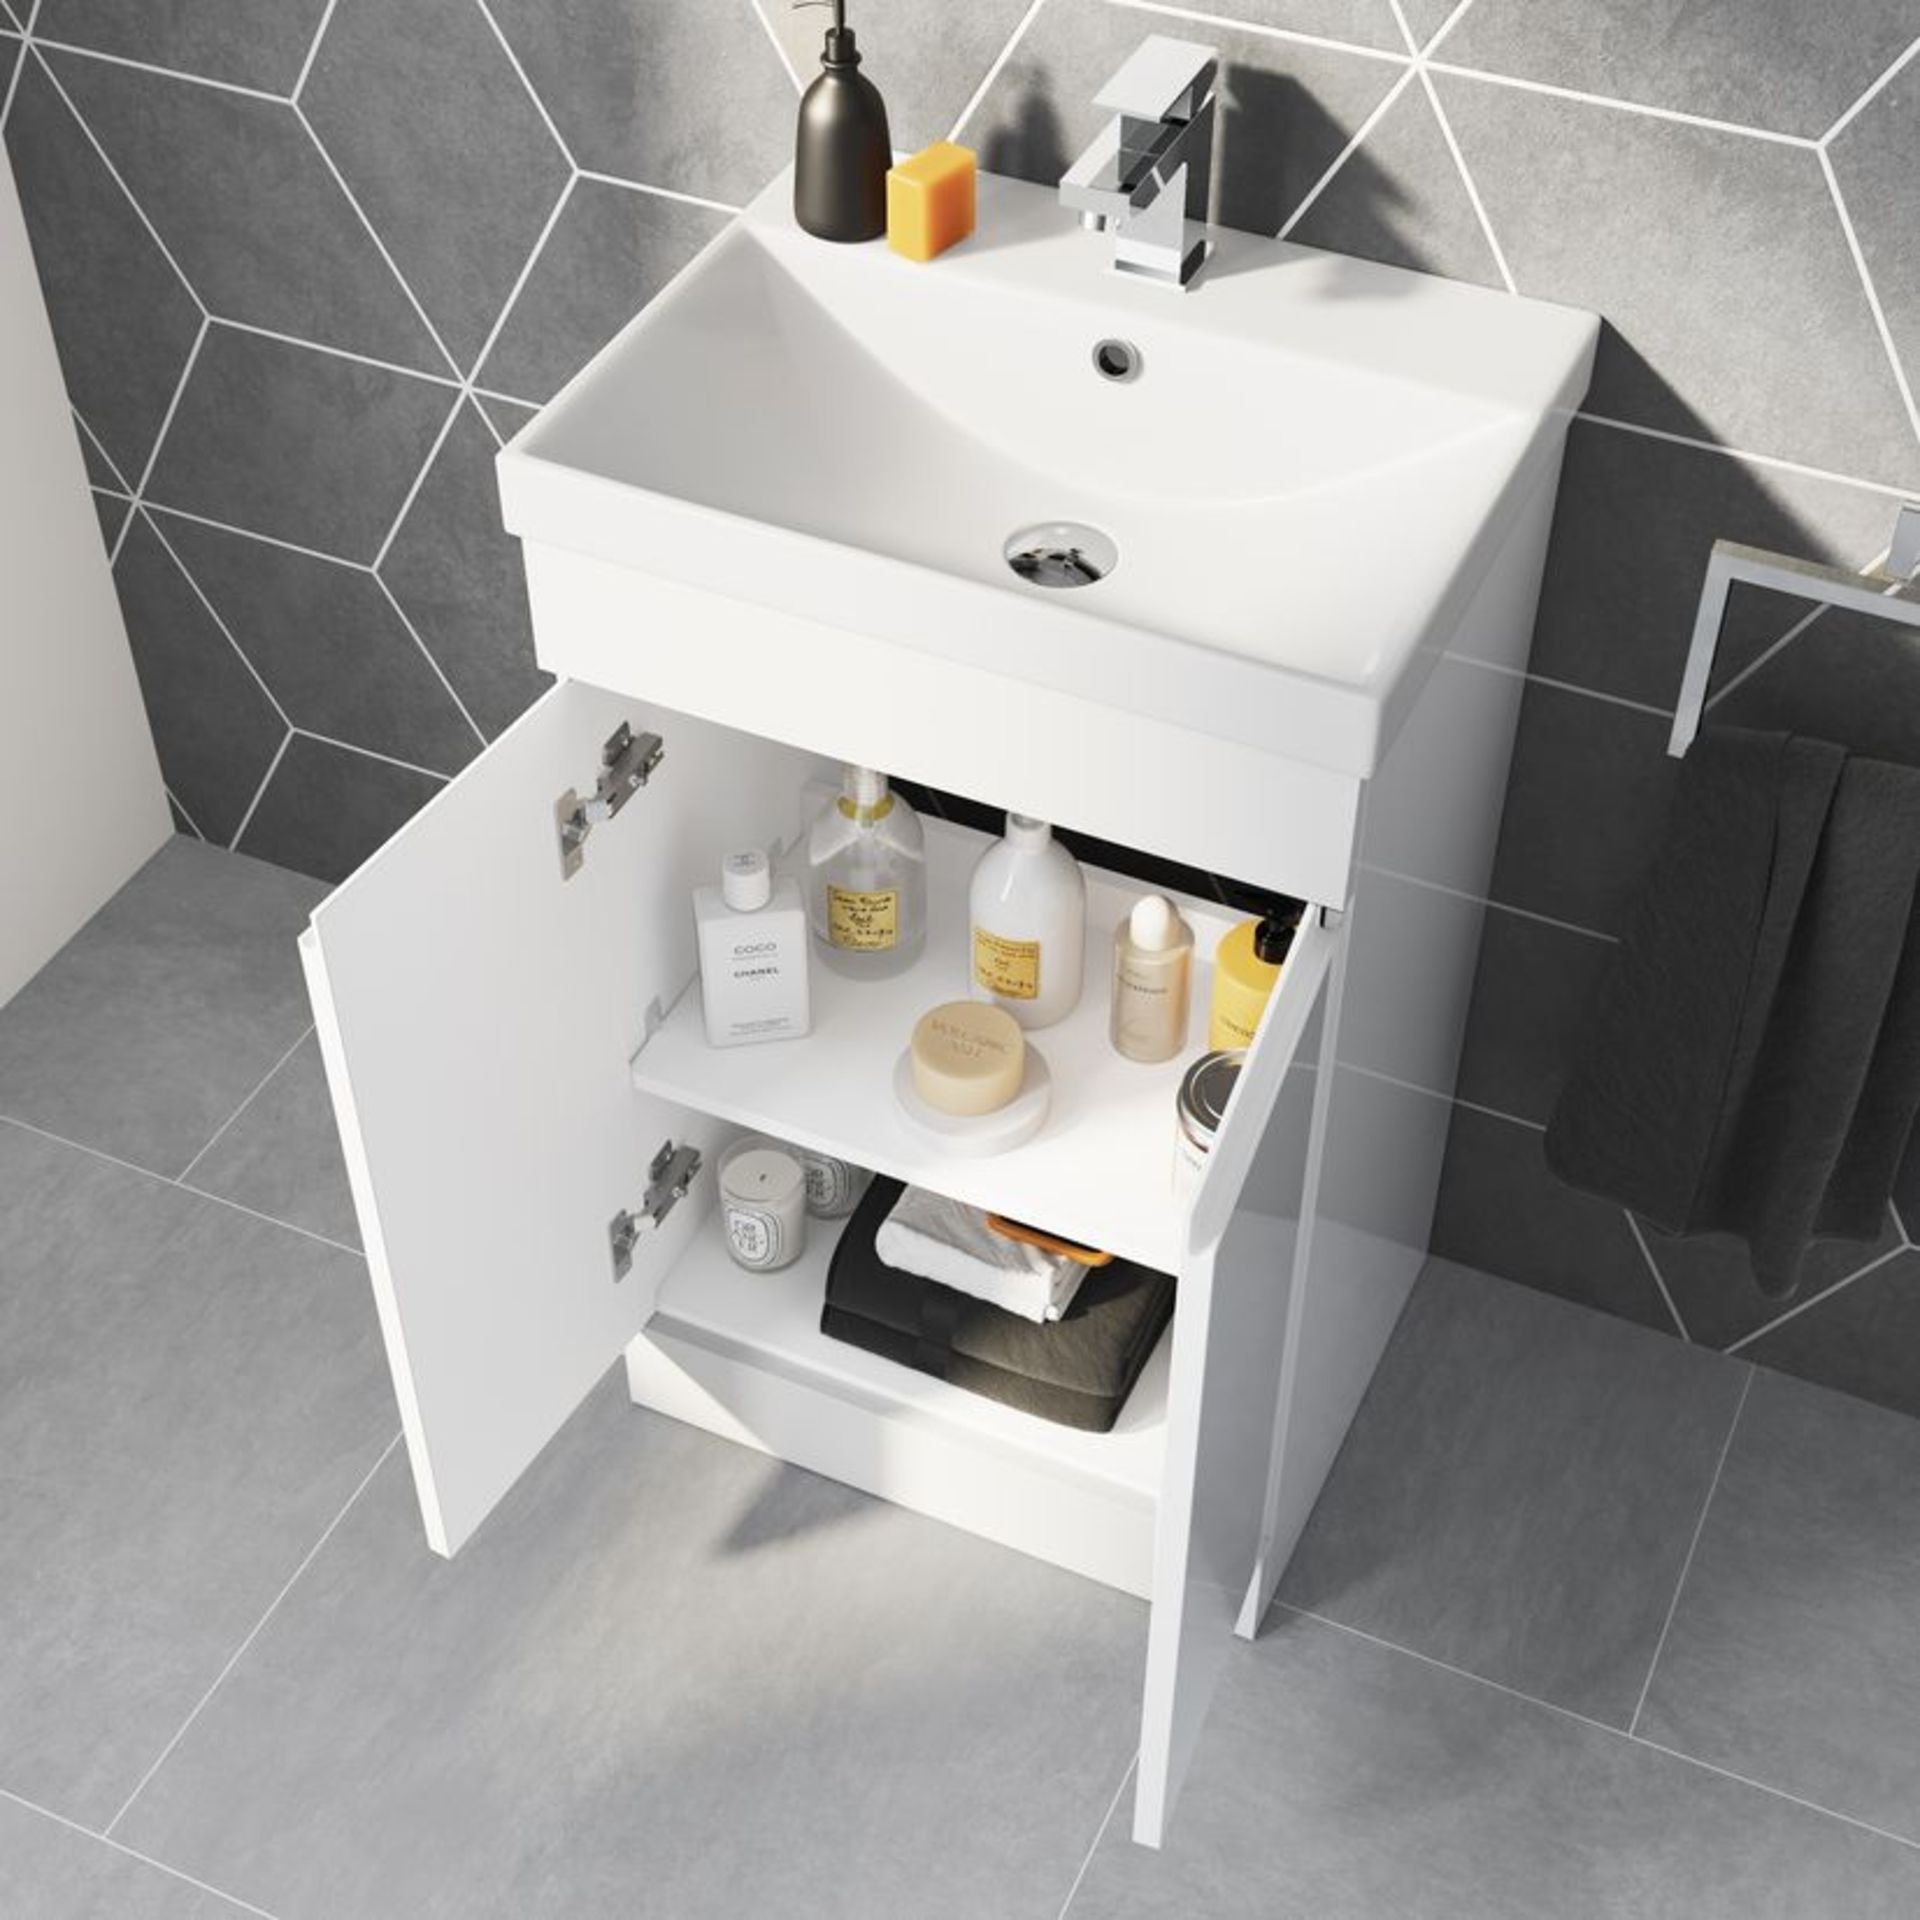 NEW (H70) 500mm Tehiti White Gloss Vanity Unit. High quality gloss white finish Made from mois... - Image 2 of 3